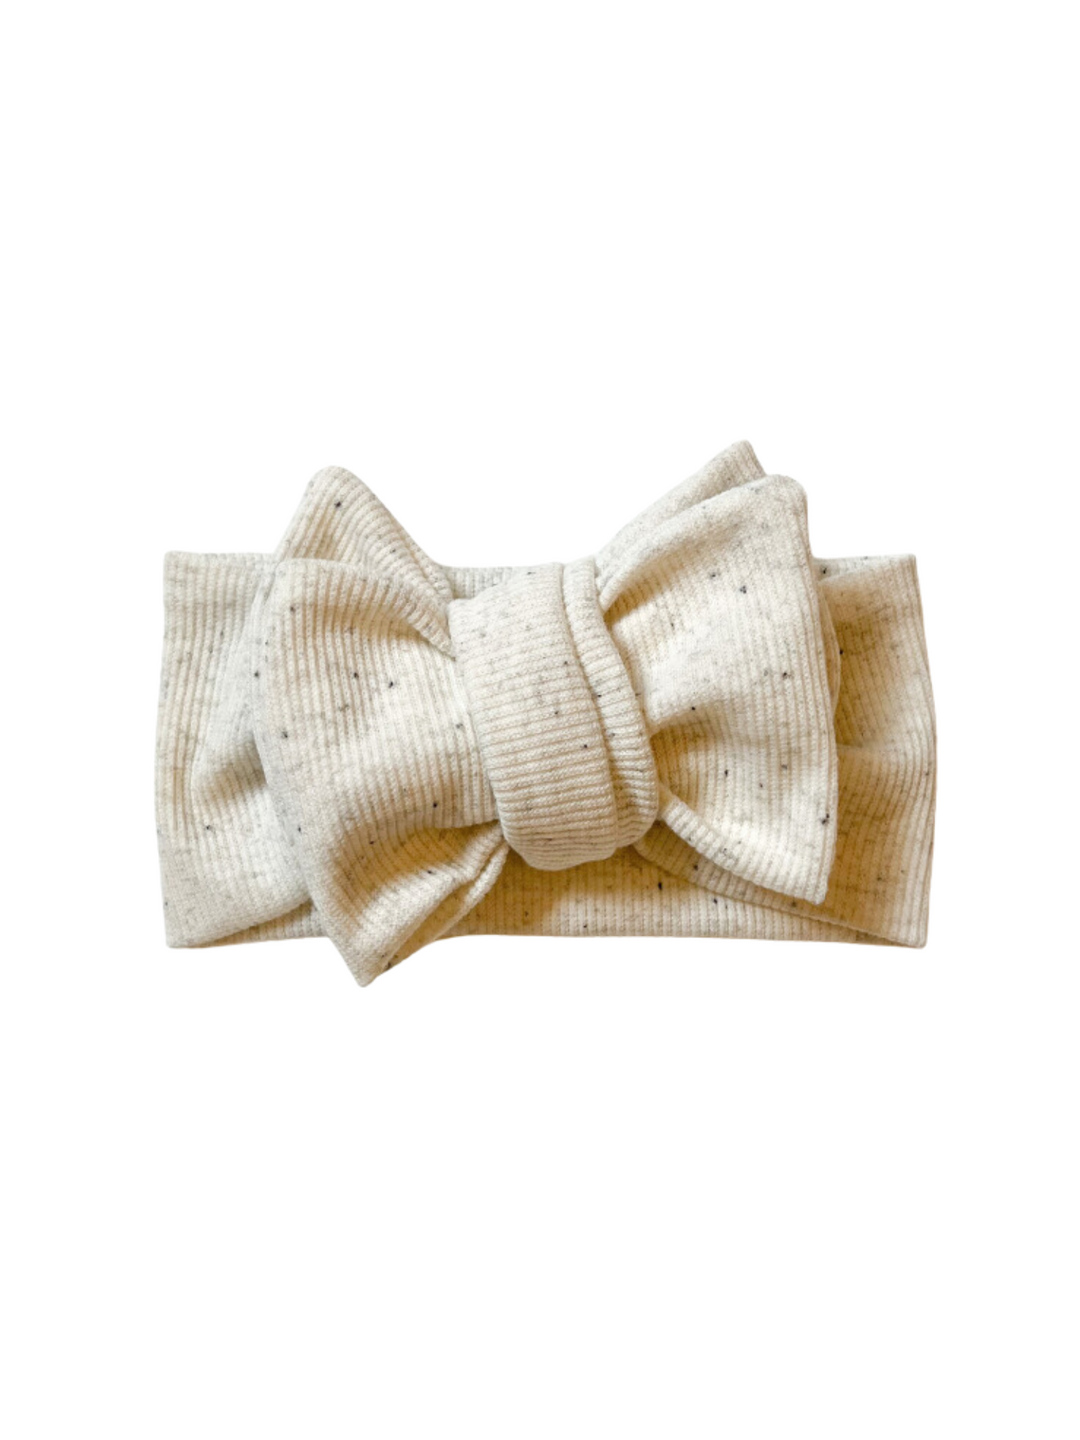 Oversized Speckle Rib Bow - Cookies and Cream